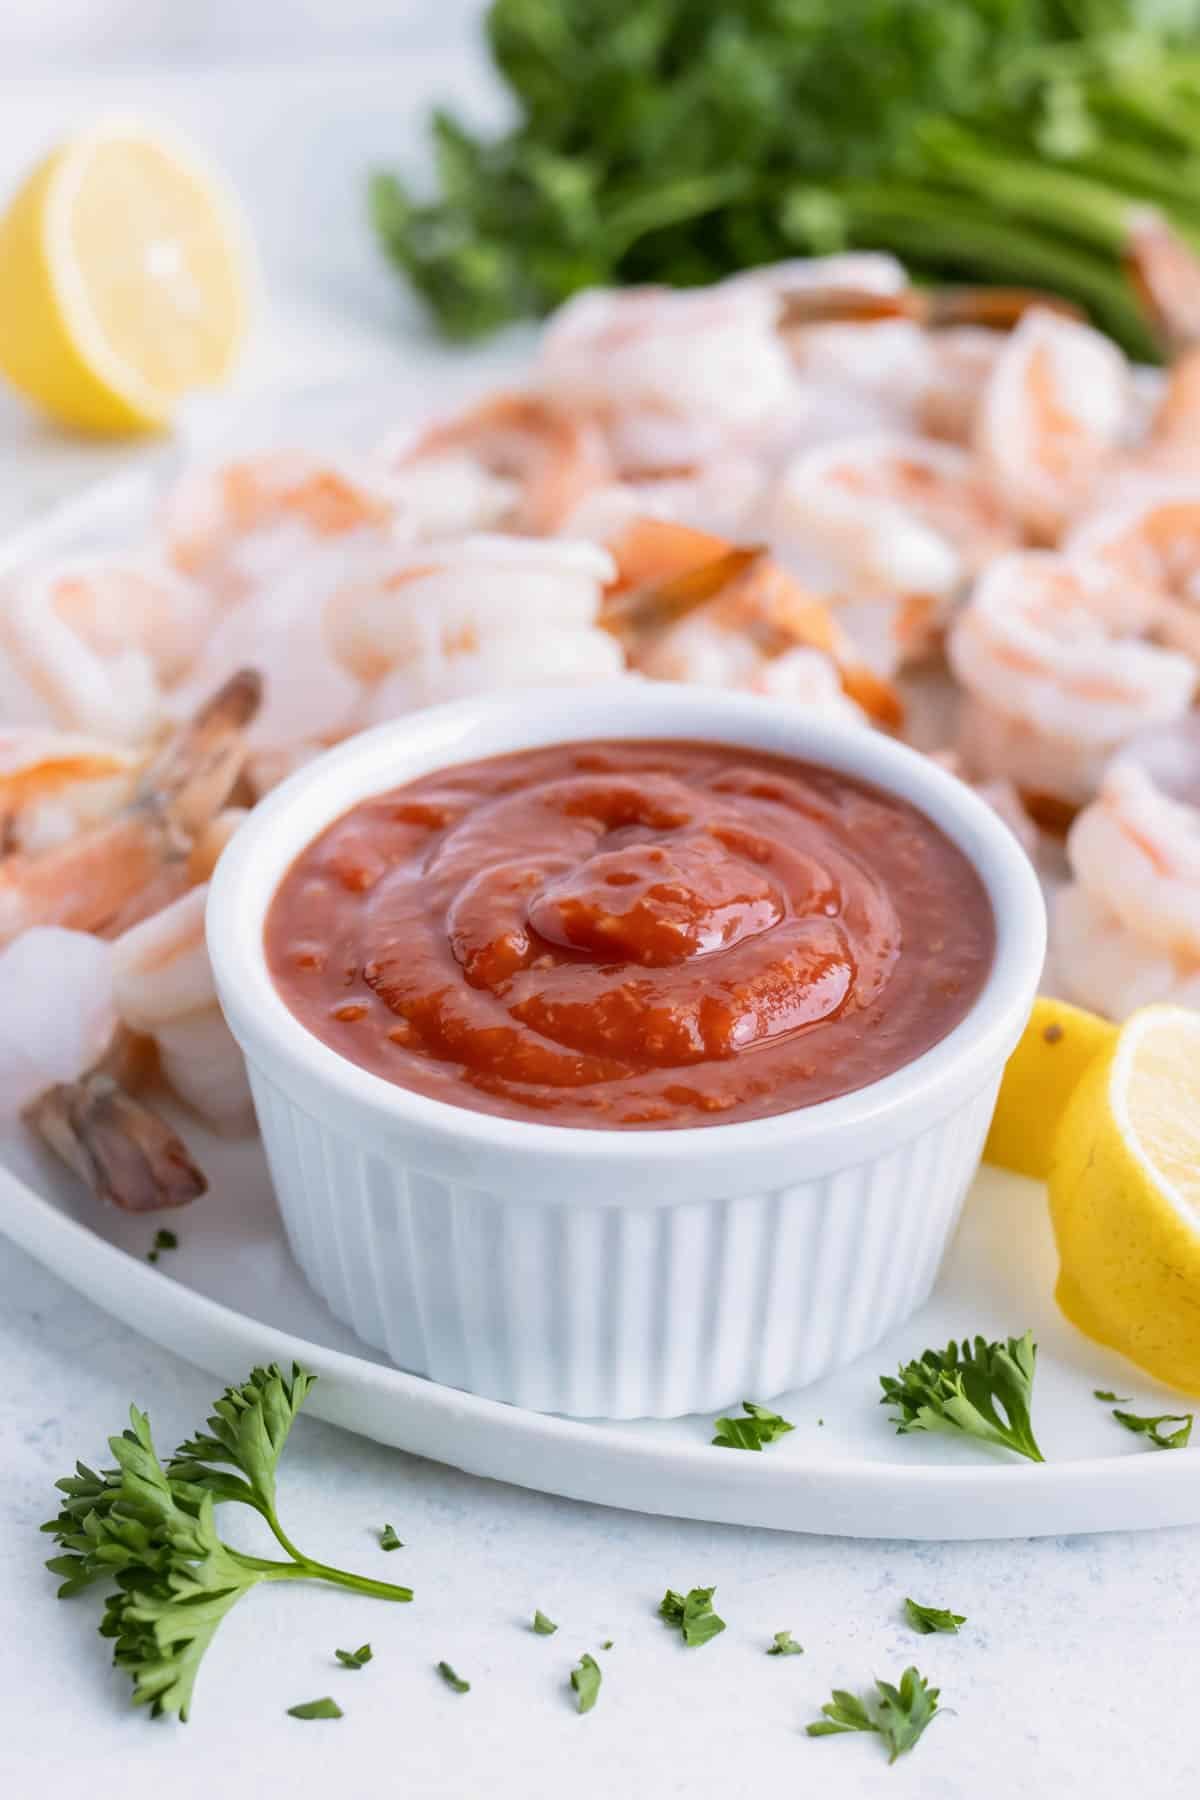 Shrimp is served on a platter with homemade sauce.